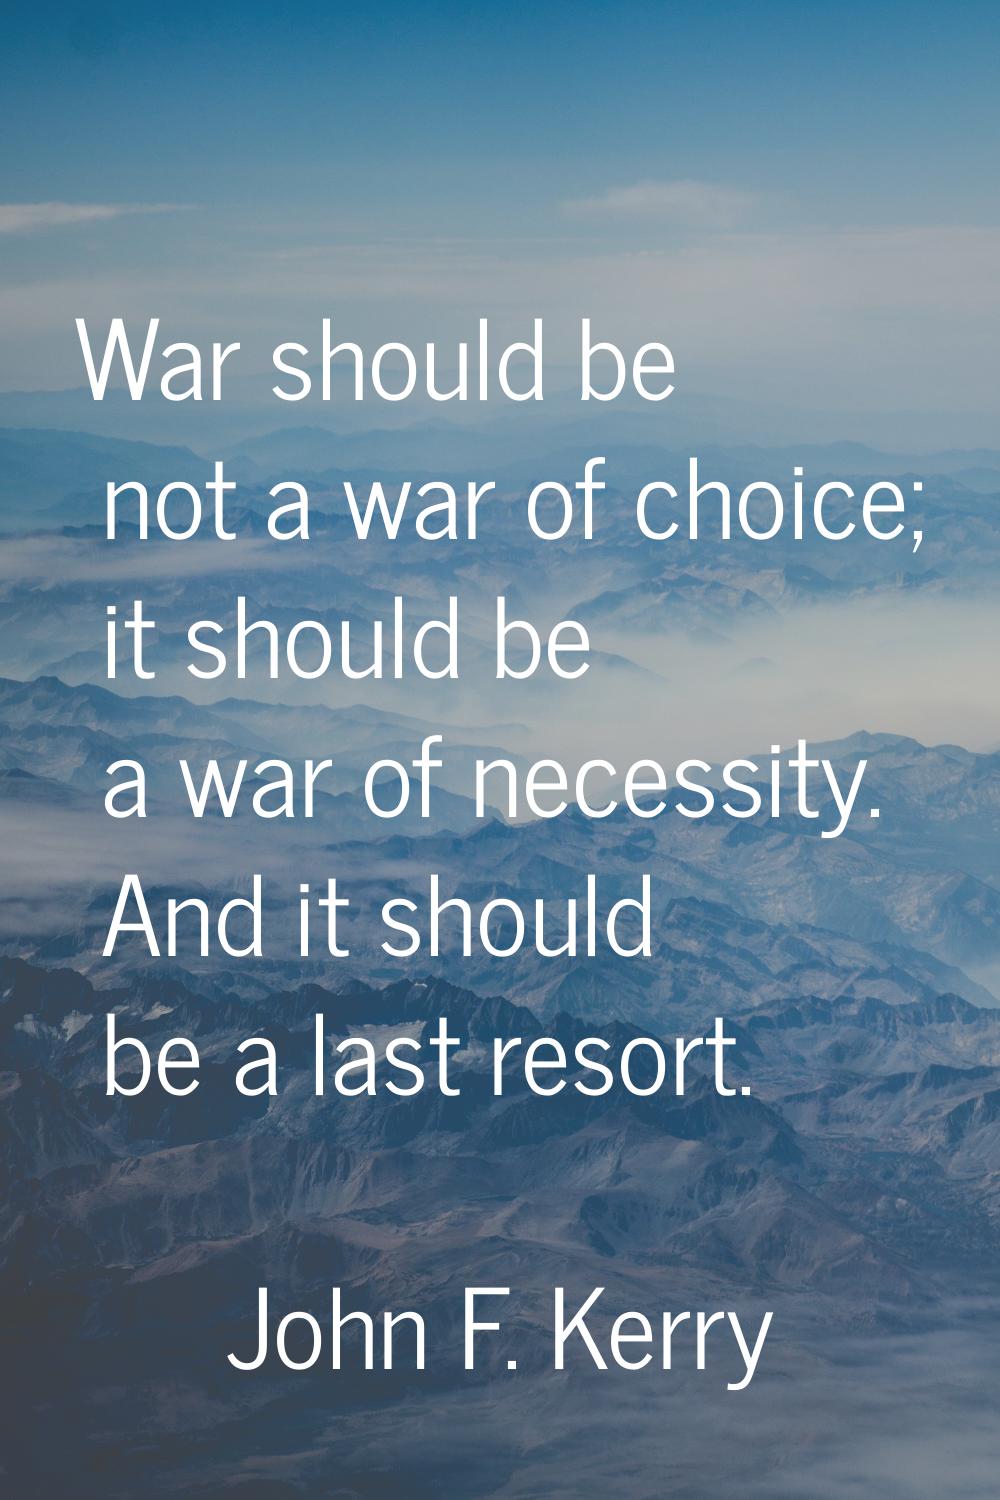 War should be not a war of choice; it should be a war of necessity. And it should be a last resort.